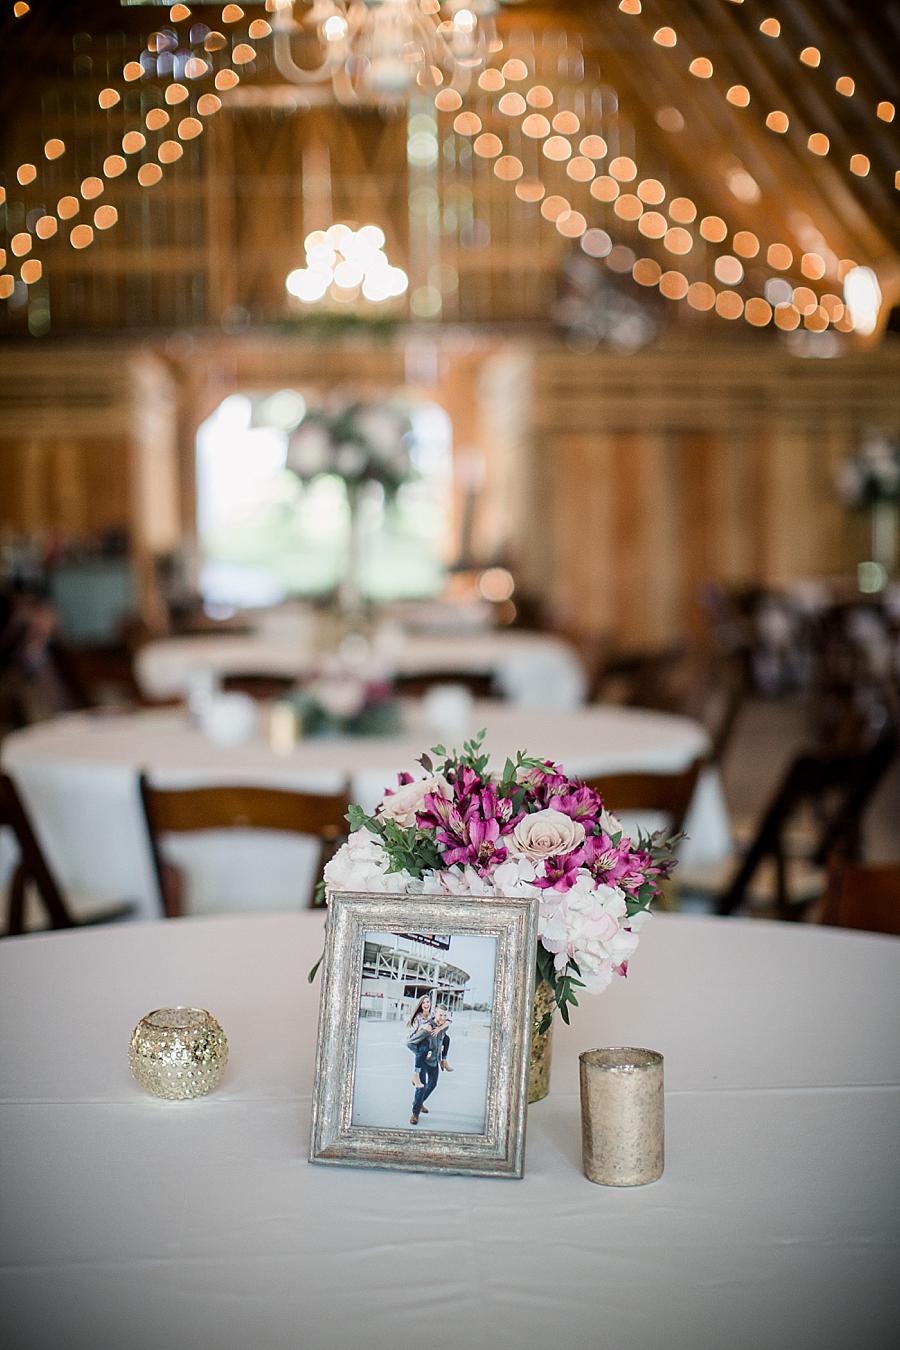 Centerpieces at this RiverView Family Farm Wedding by Knoxville Wedding Photographer, Amanda May Photos.